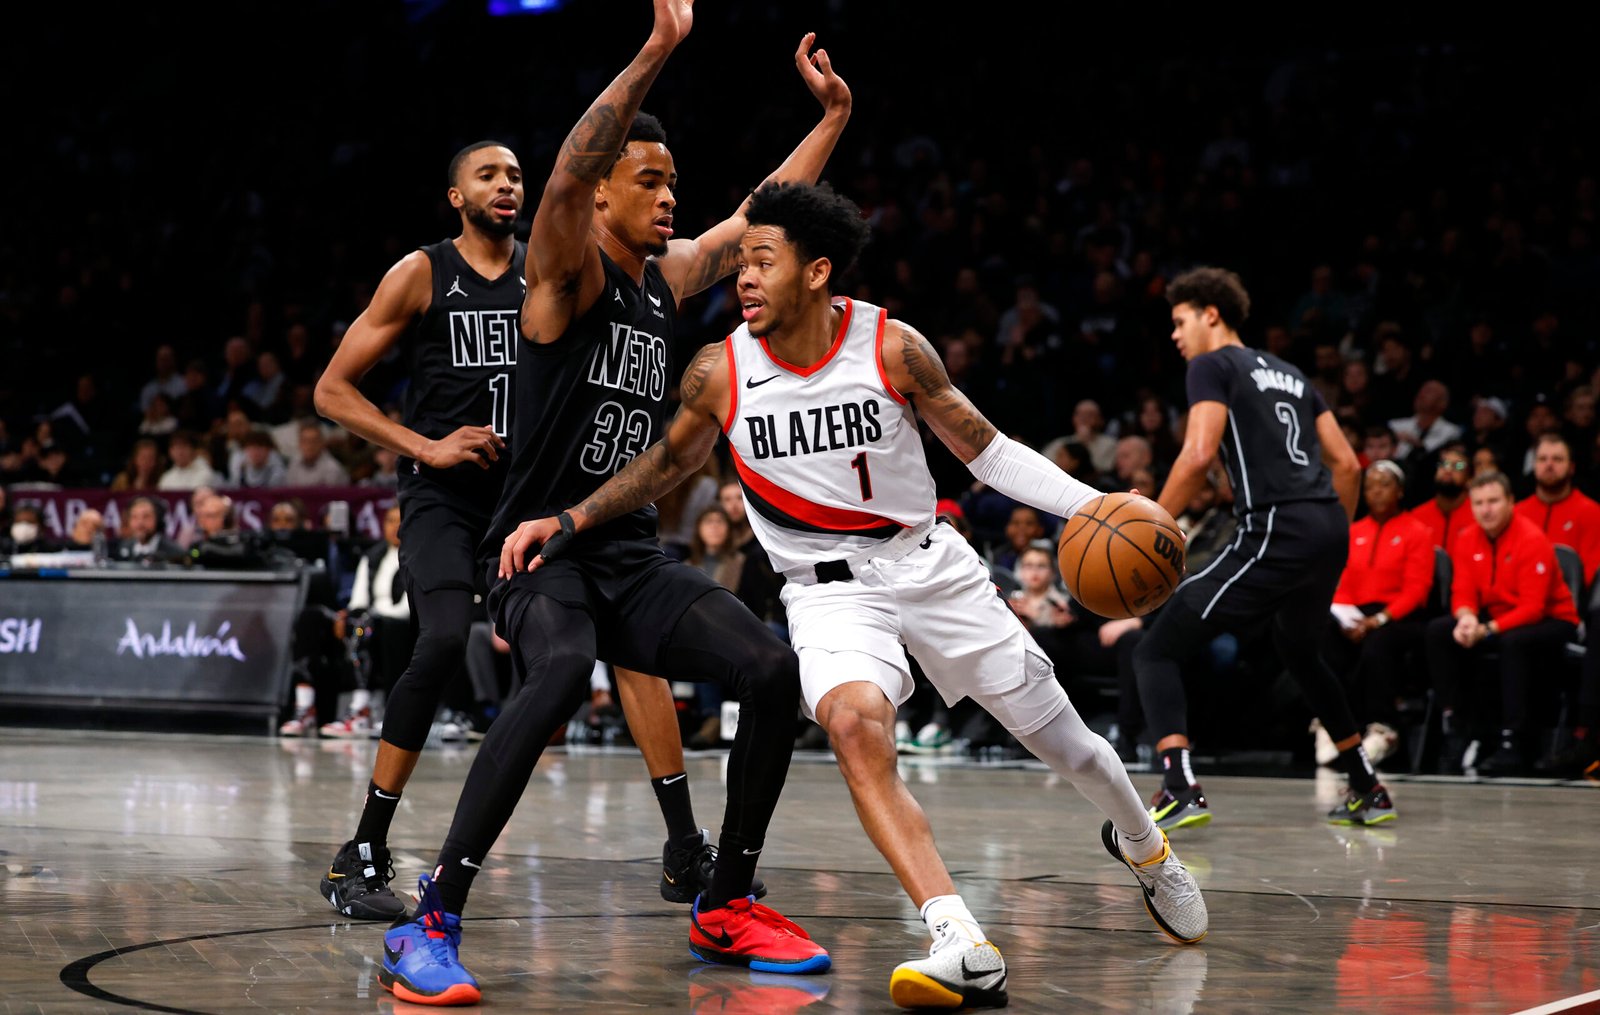 NBA: Trail Blazers nearly flawless in overtime to beat Nets